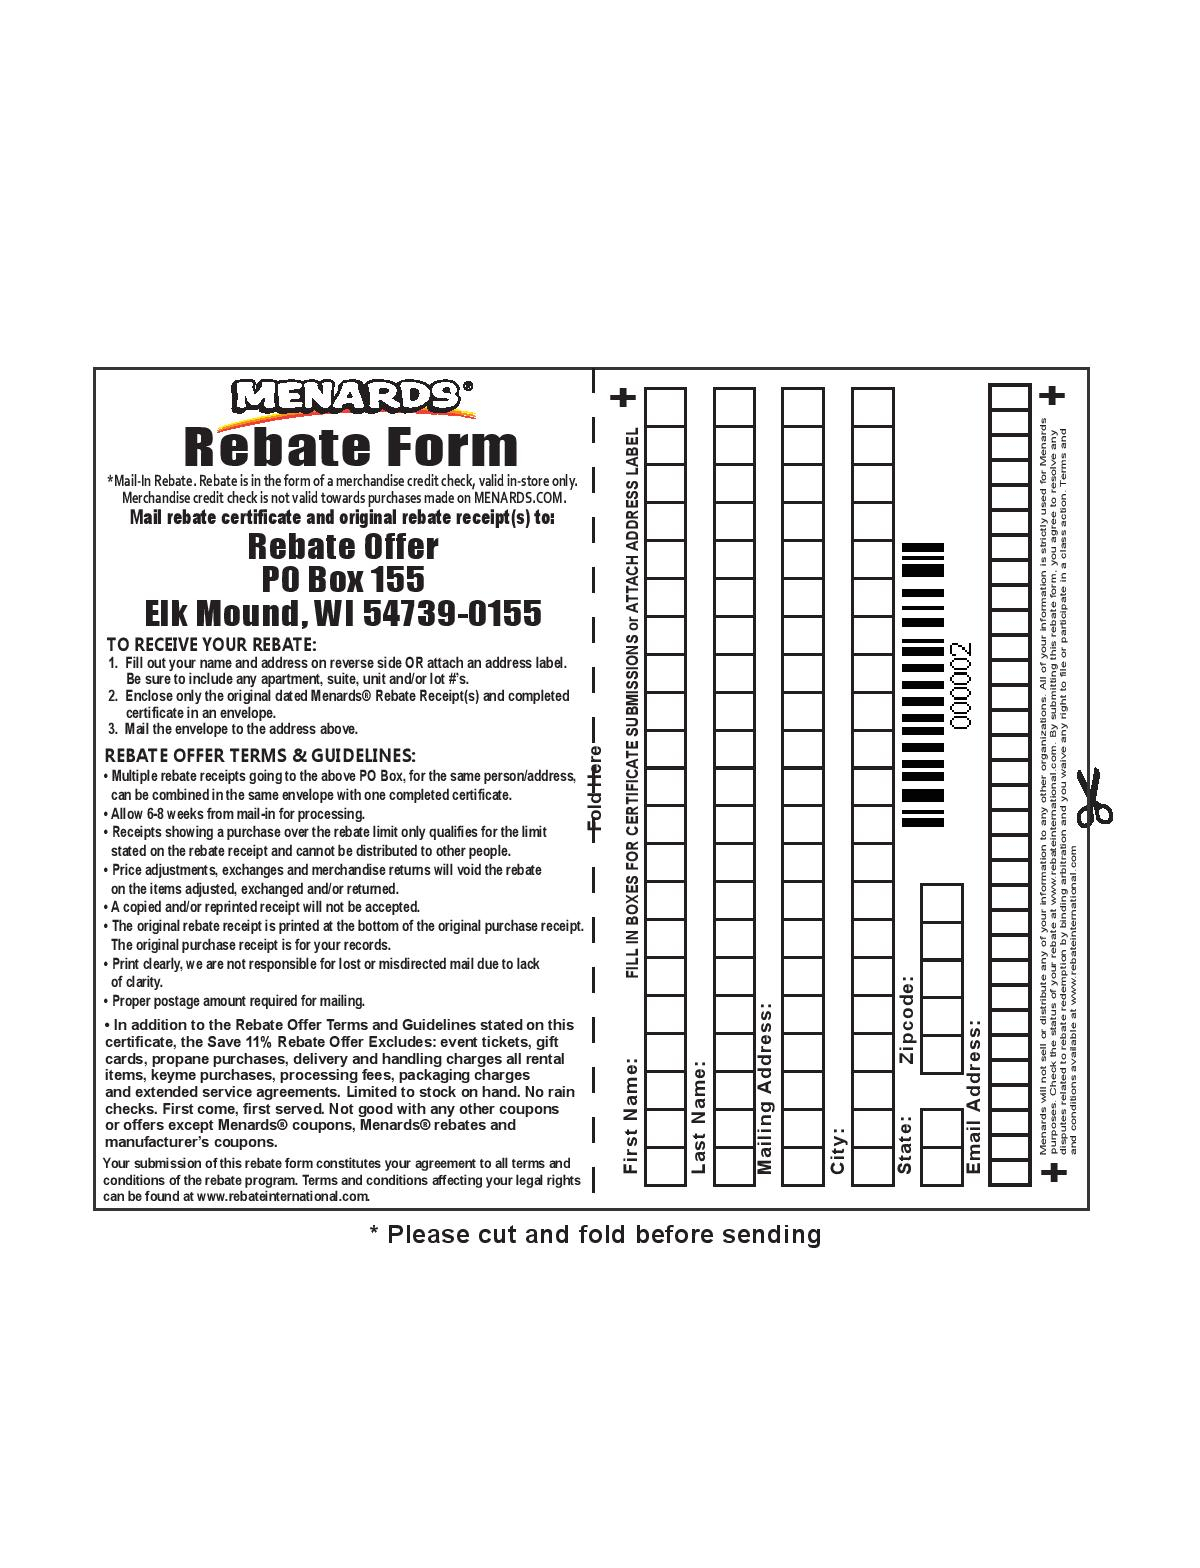 How Long Does It Take To Get A Menards Rebate